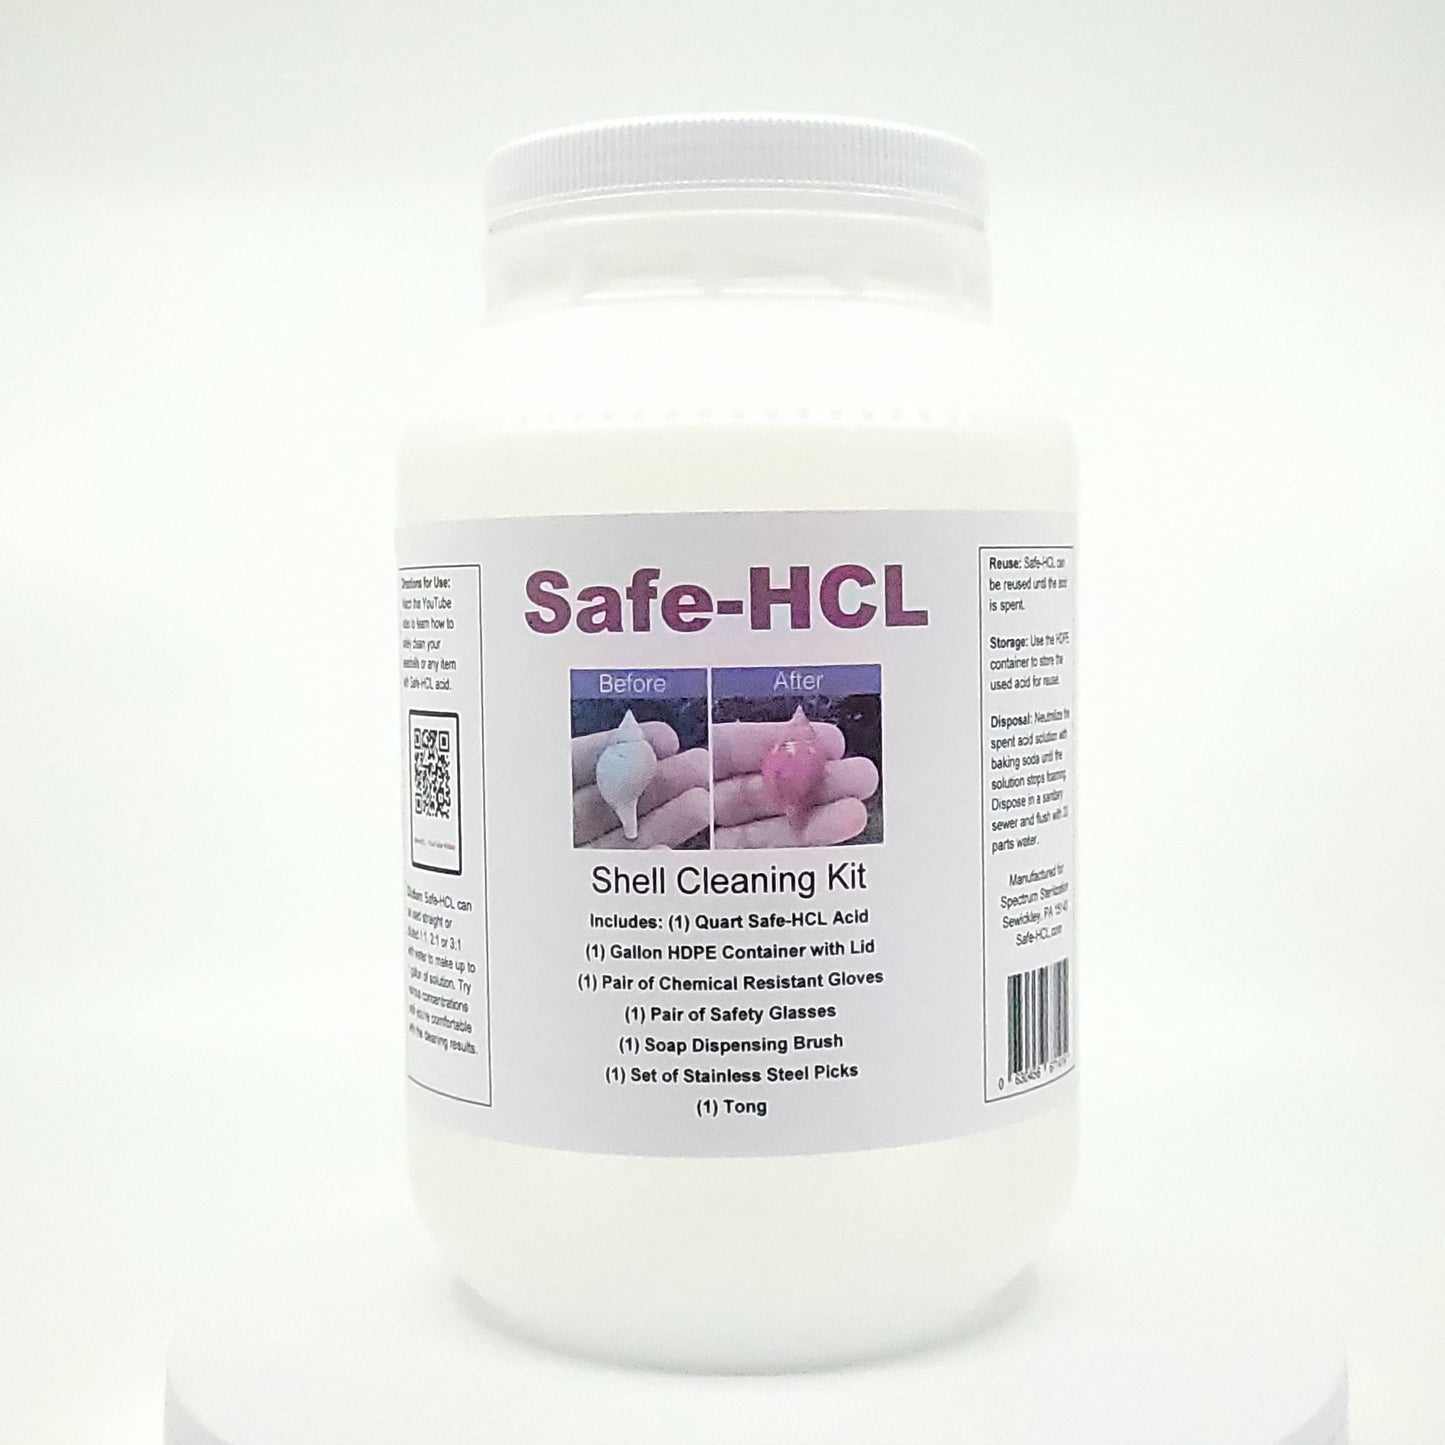 Safe-HCL Seashell Cleaning Kit - Includes: (1) quart of Safe-HCL acid, (1) gallon HDPE storage container, safety gear and cleaning utensils